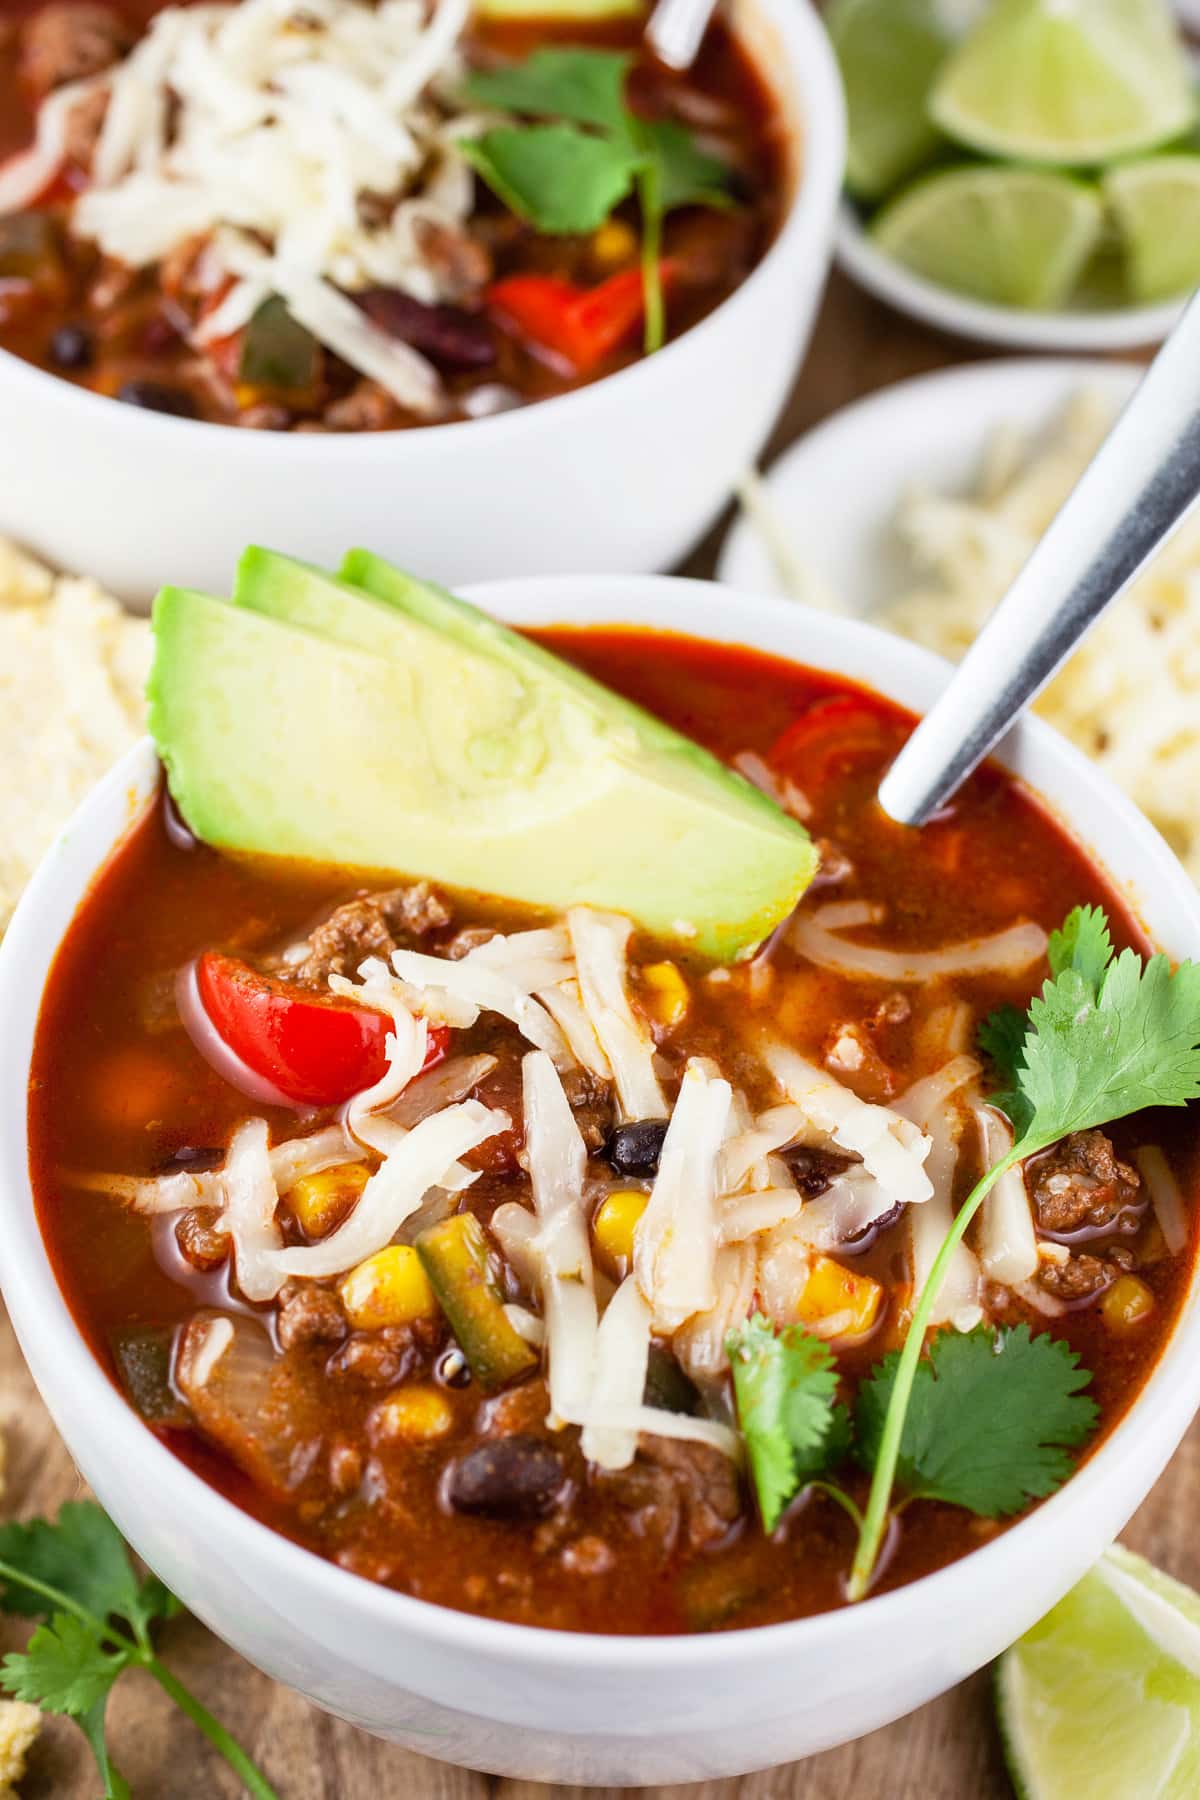 Ground beef chili with cheese, avocado, cilantro, and limes in bowls.